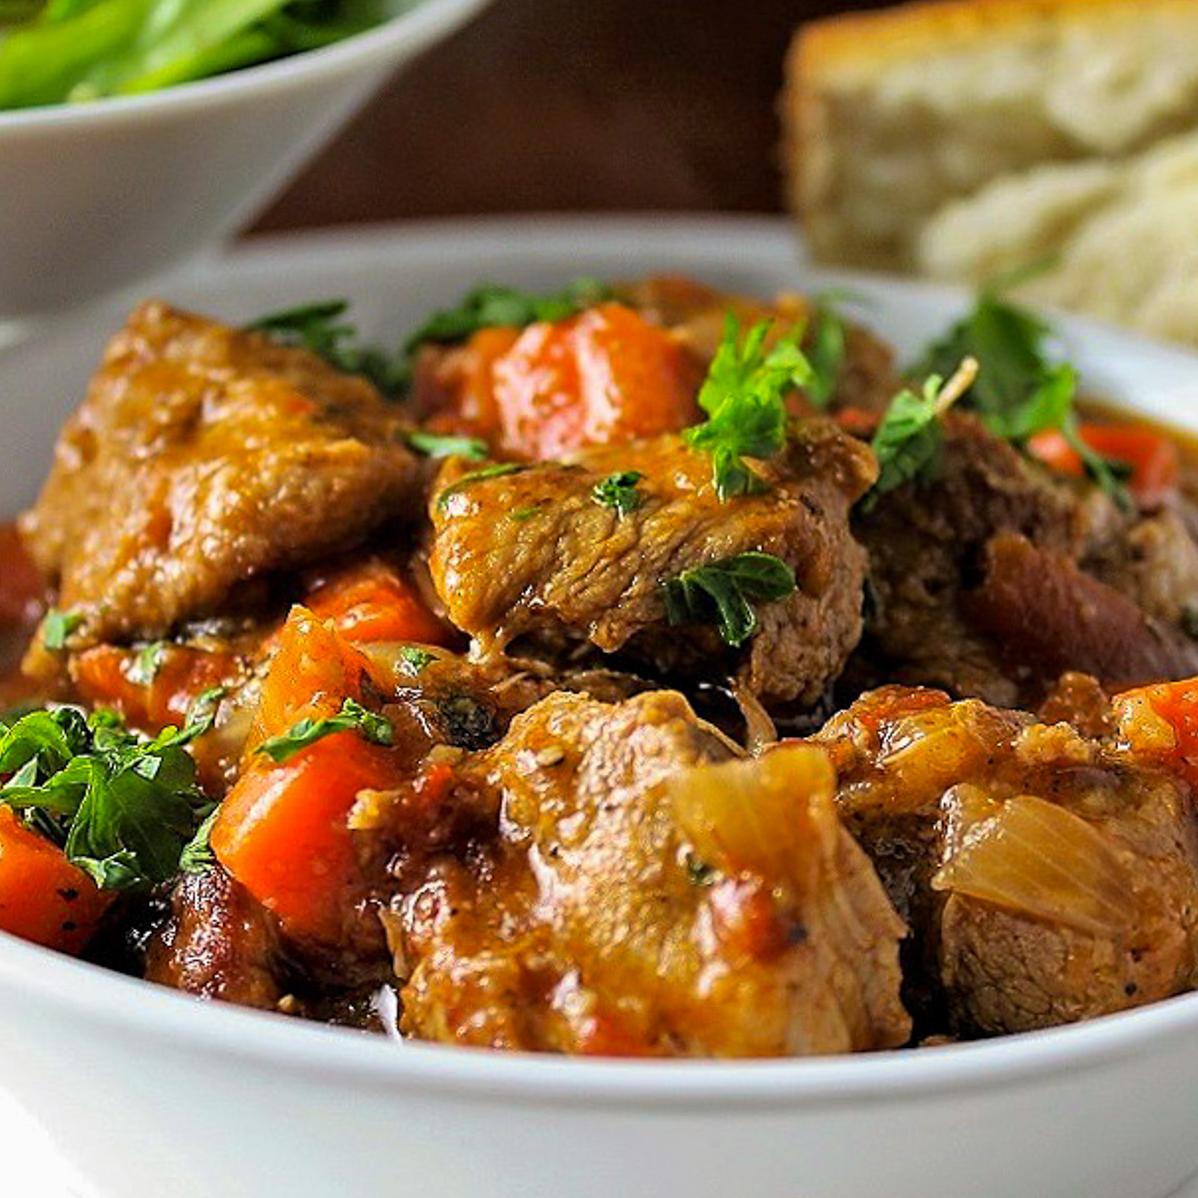  Let the aroma of this hearty veal stew warm your soul